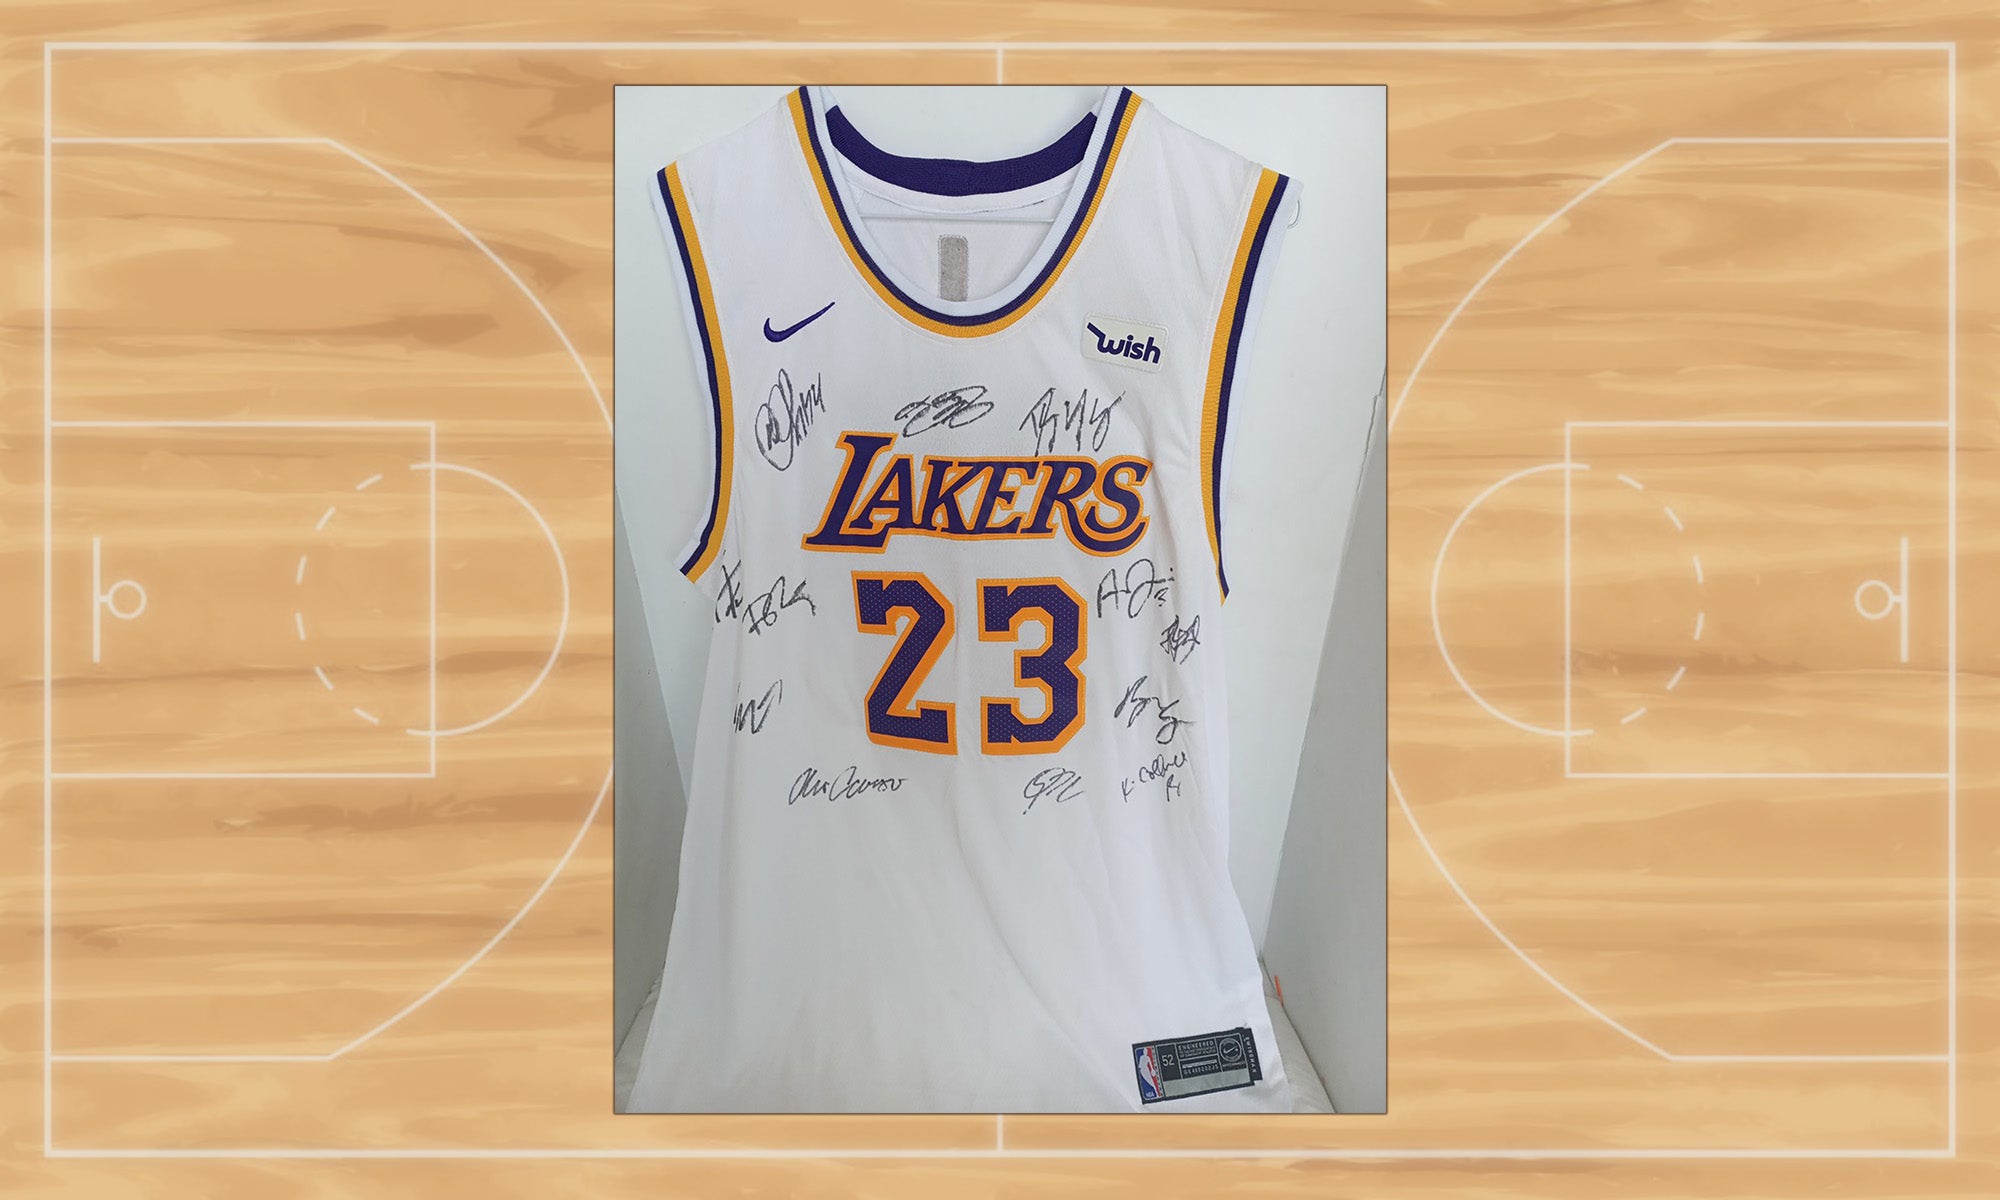 What LeBron Jersey Is This?? : r/lakers